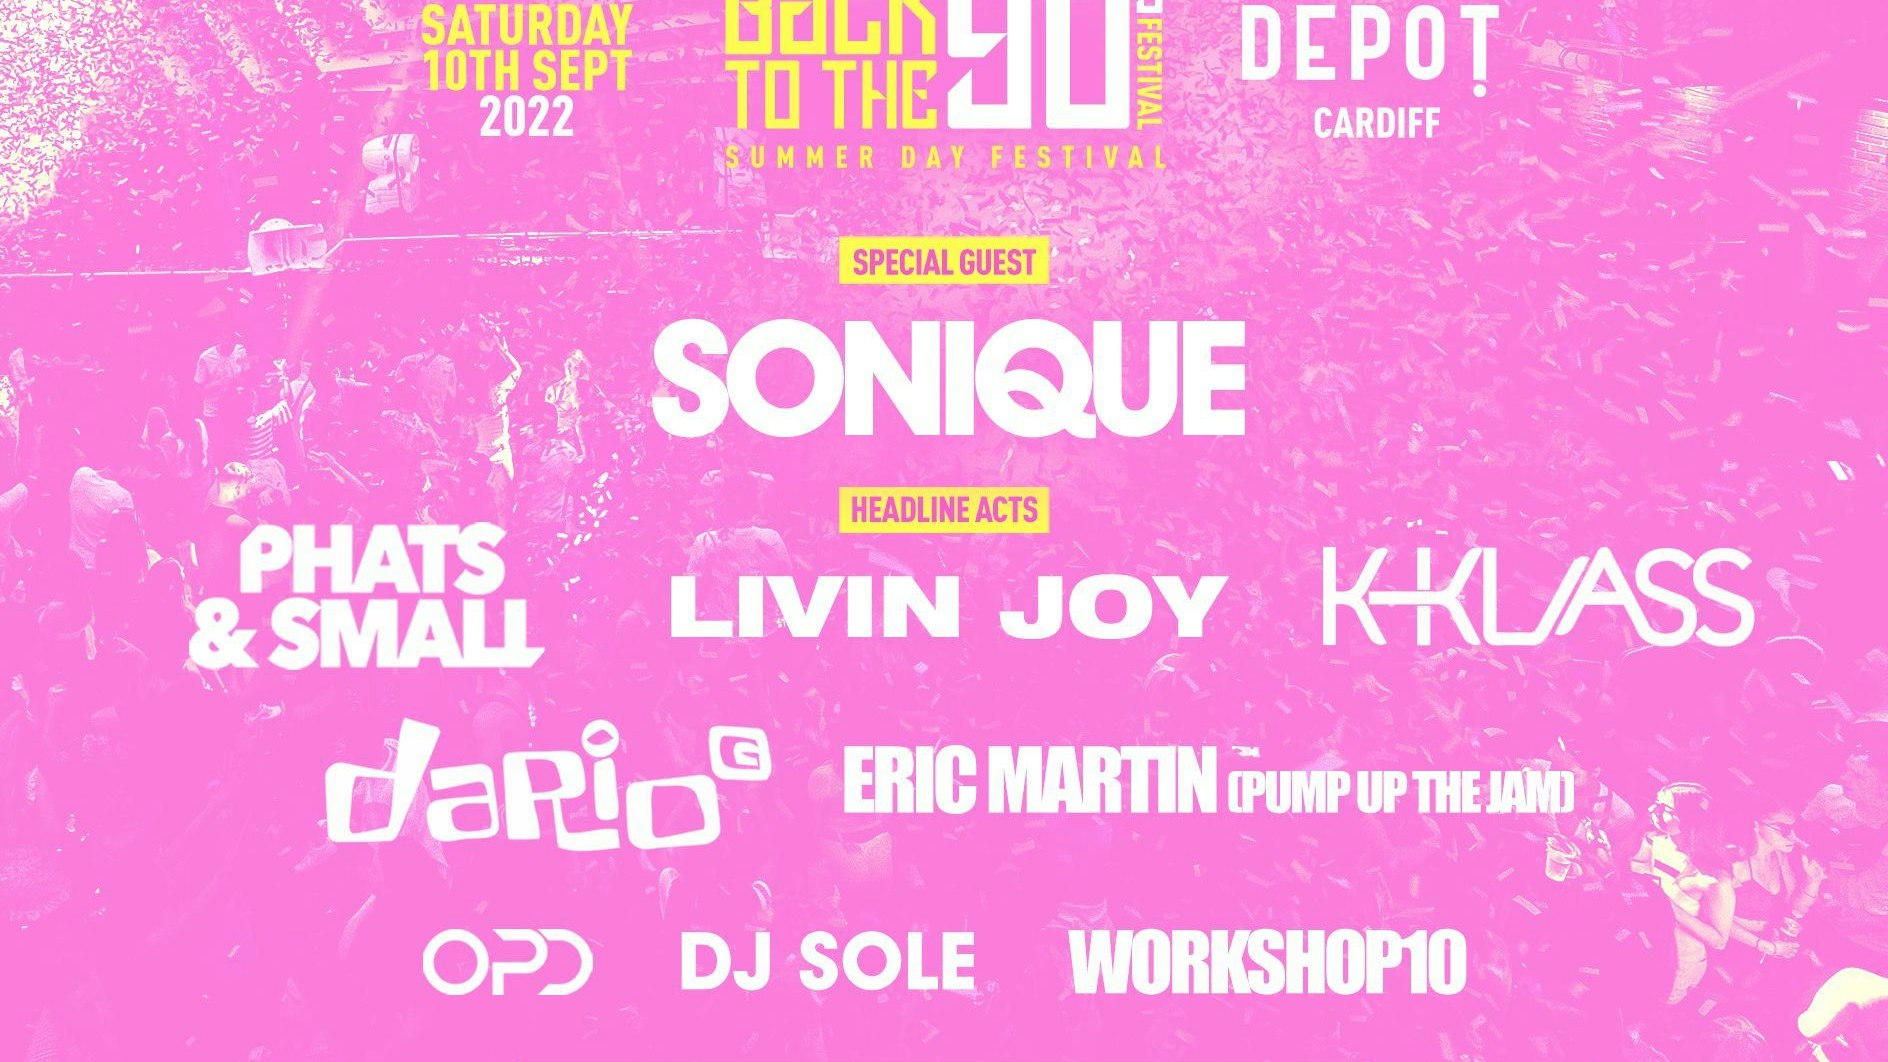 Summer Indoor 90s Day Festival – DEPOT Cardiff [FINAL TICKETS]